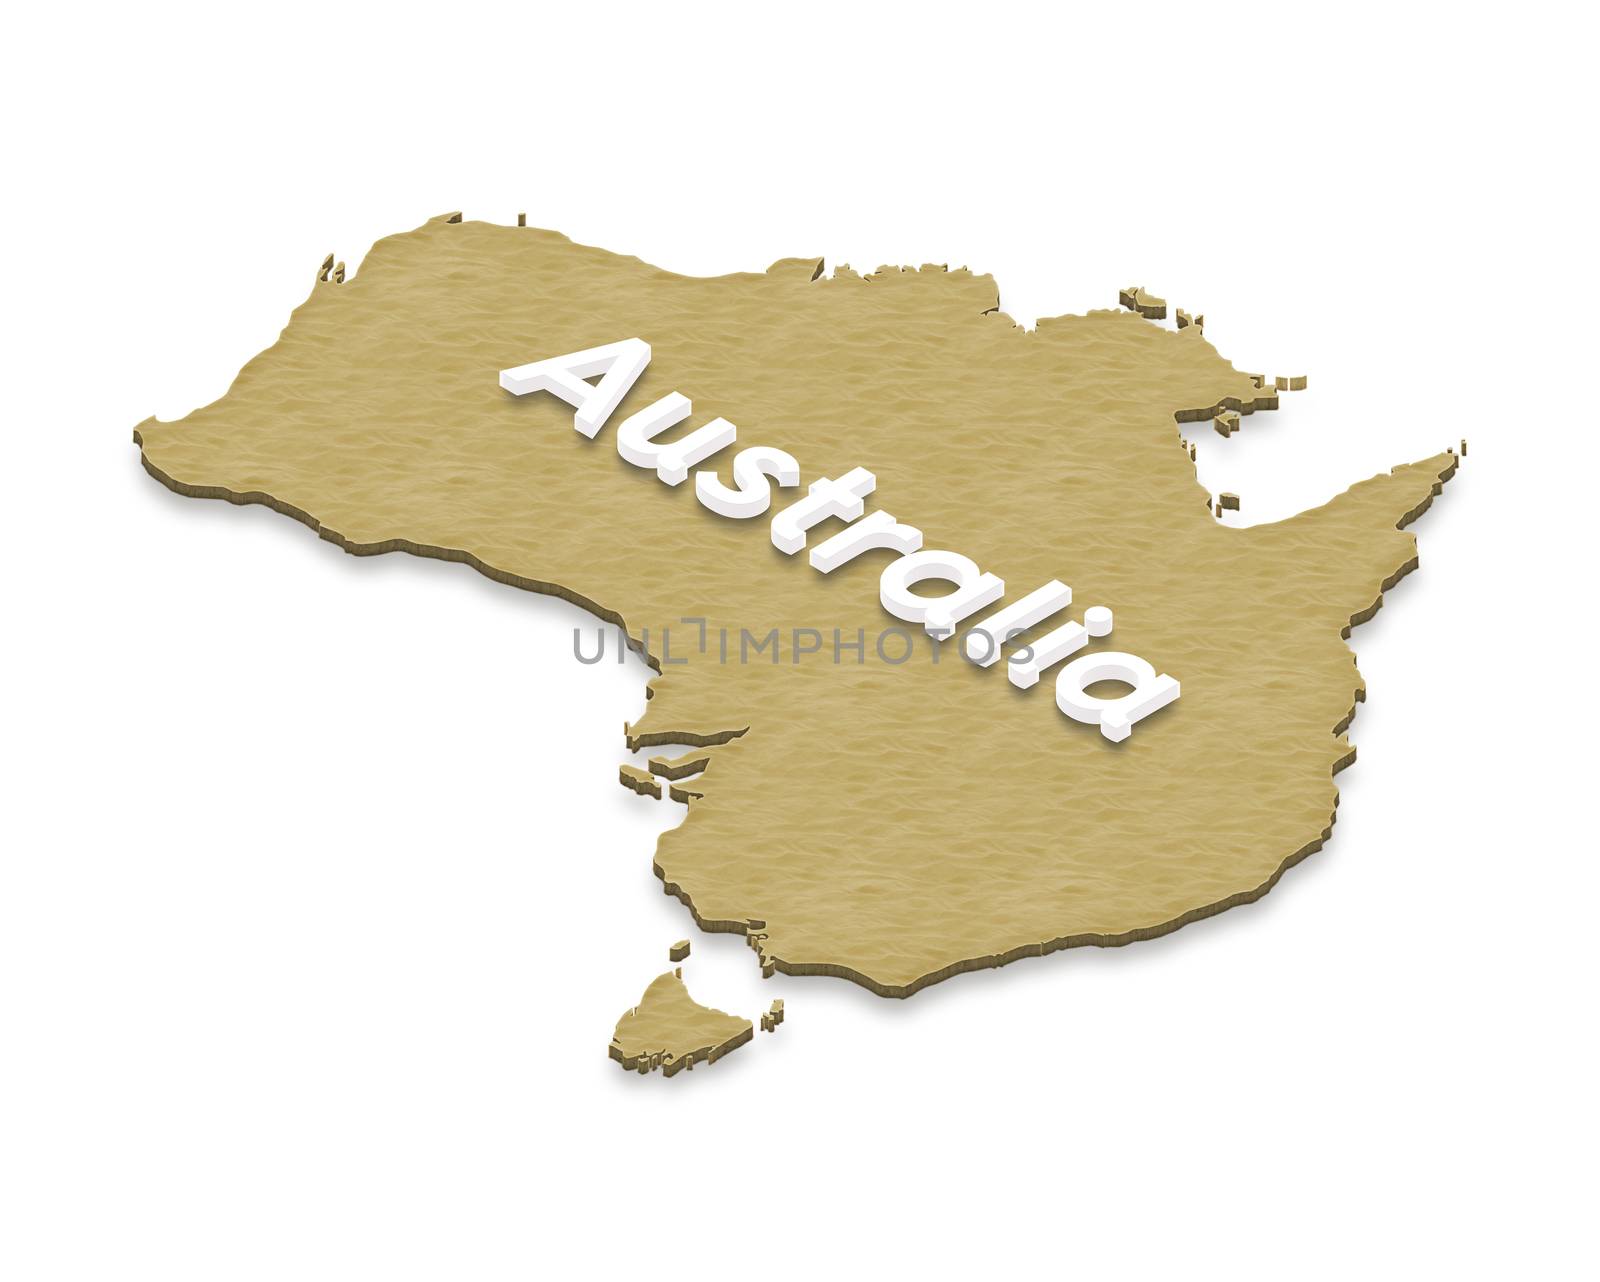 Map of Australia. 3D isometric illustration. by sanches812